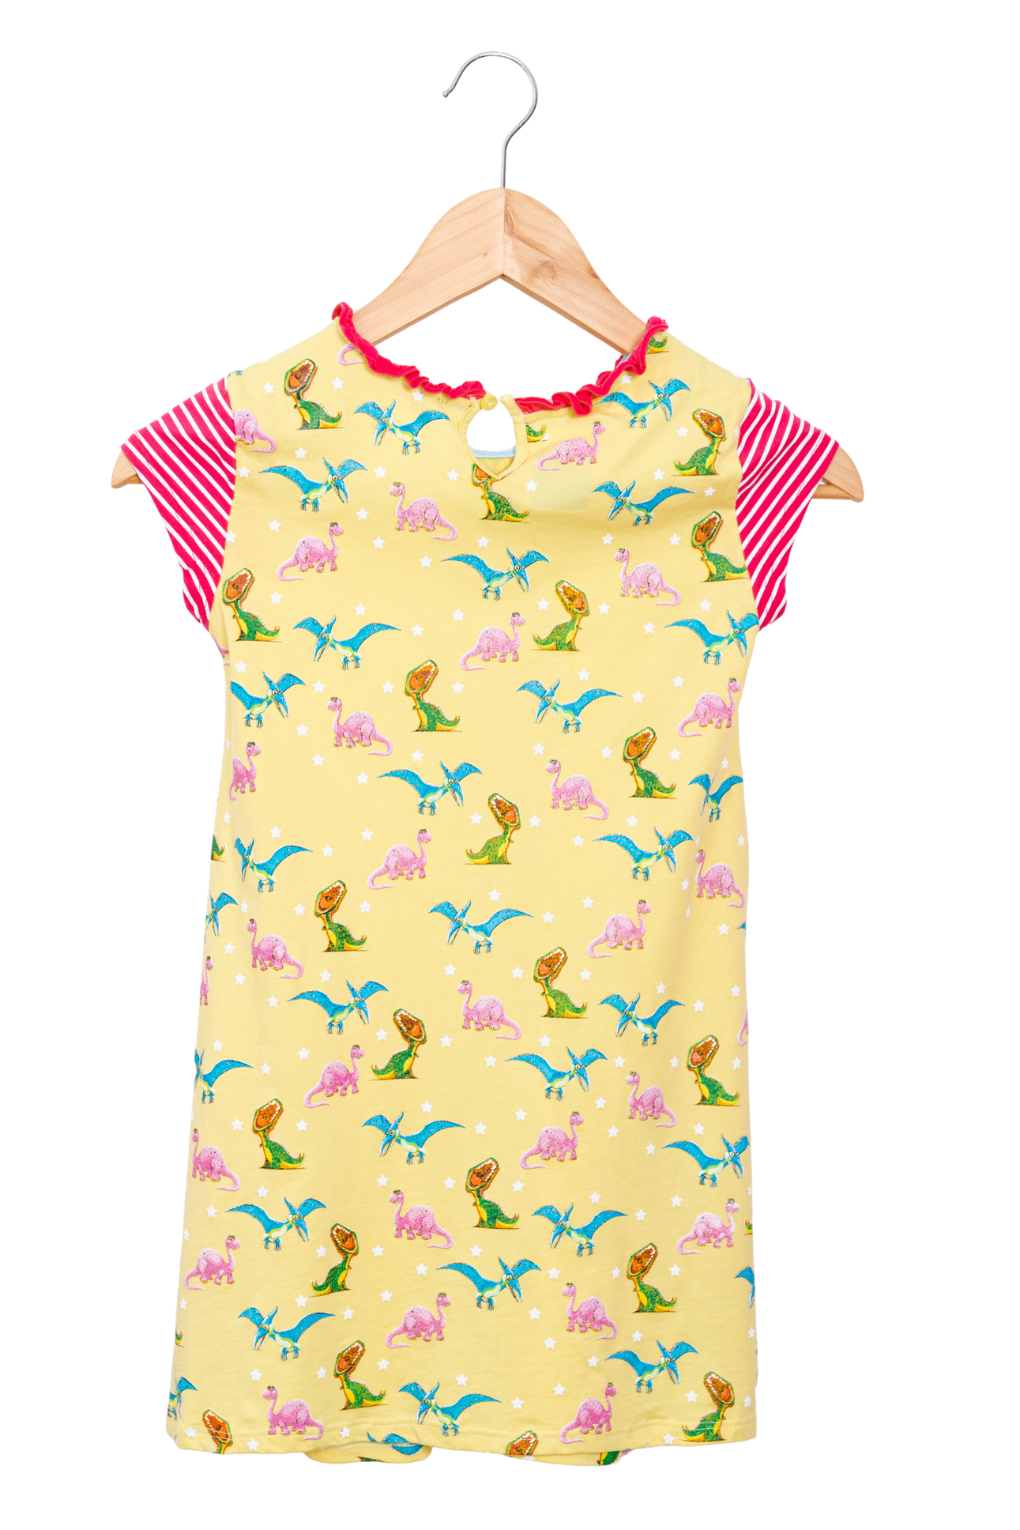 Yellow Dinosaur Dress with pockets for girls, sustainable and stain resistance. good for sensitive skin - Prisma Kiddos